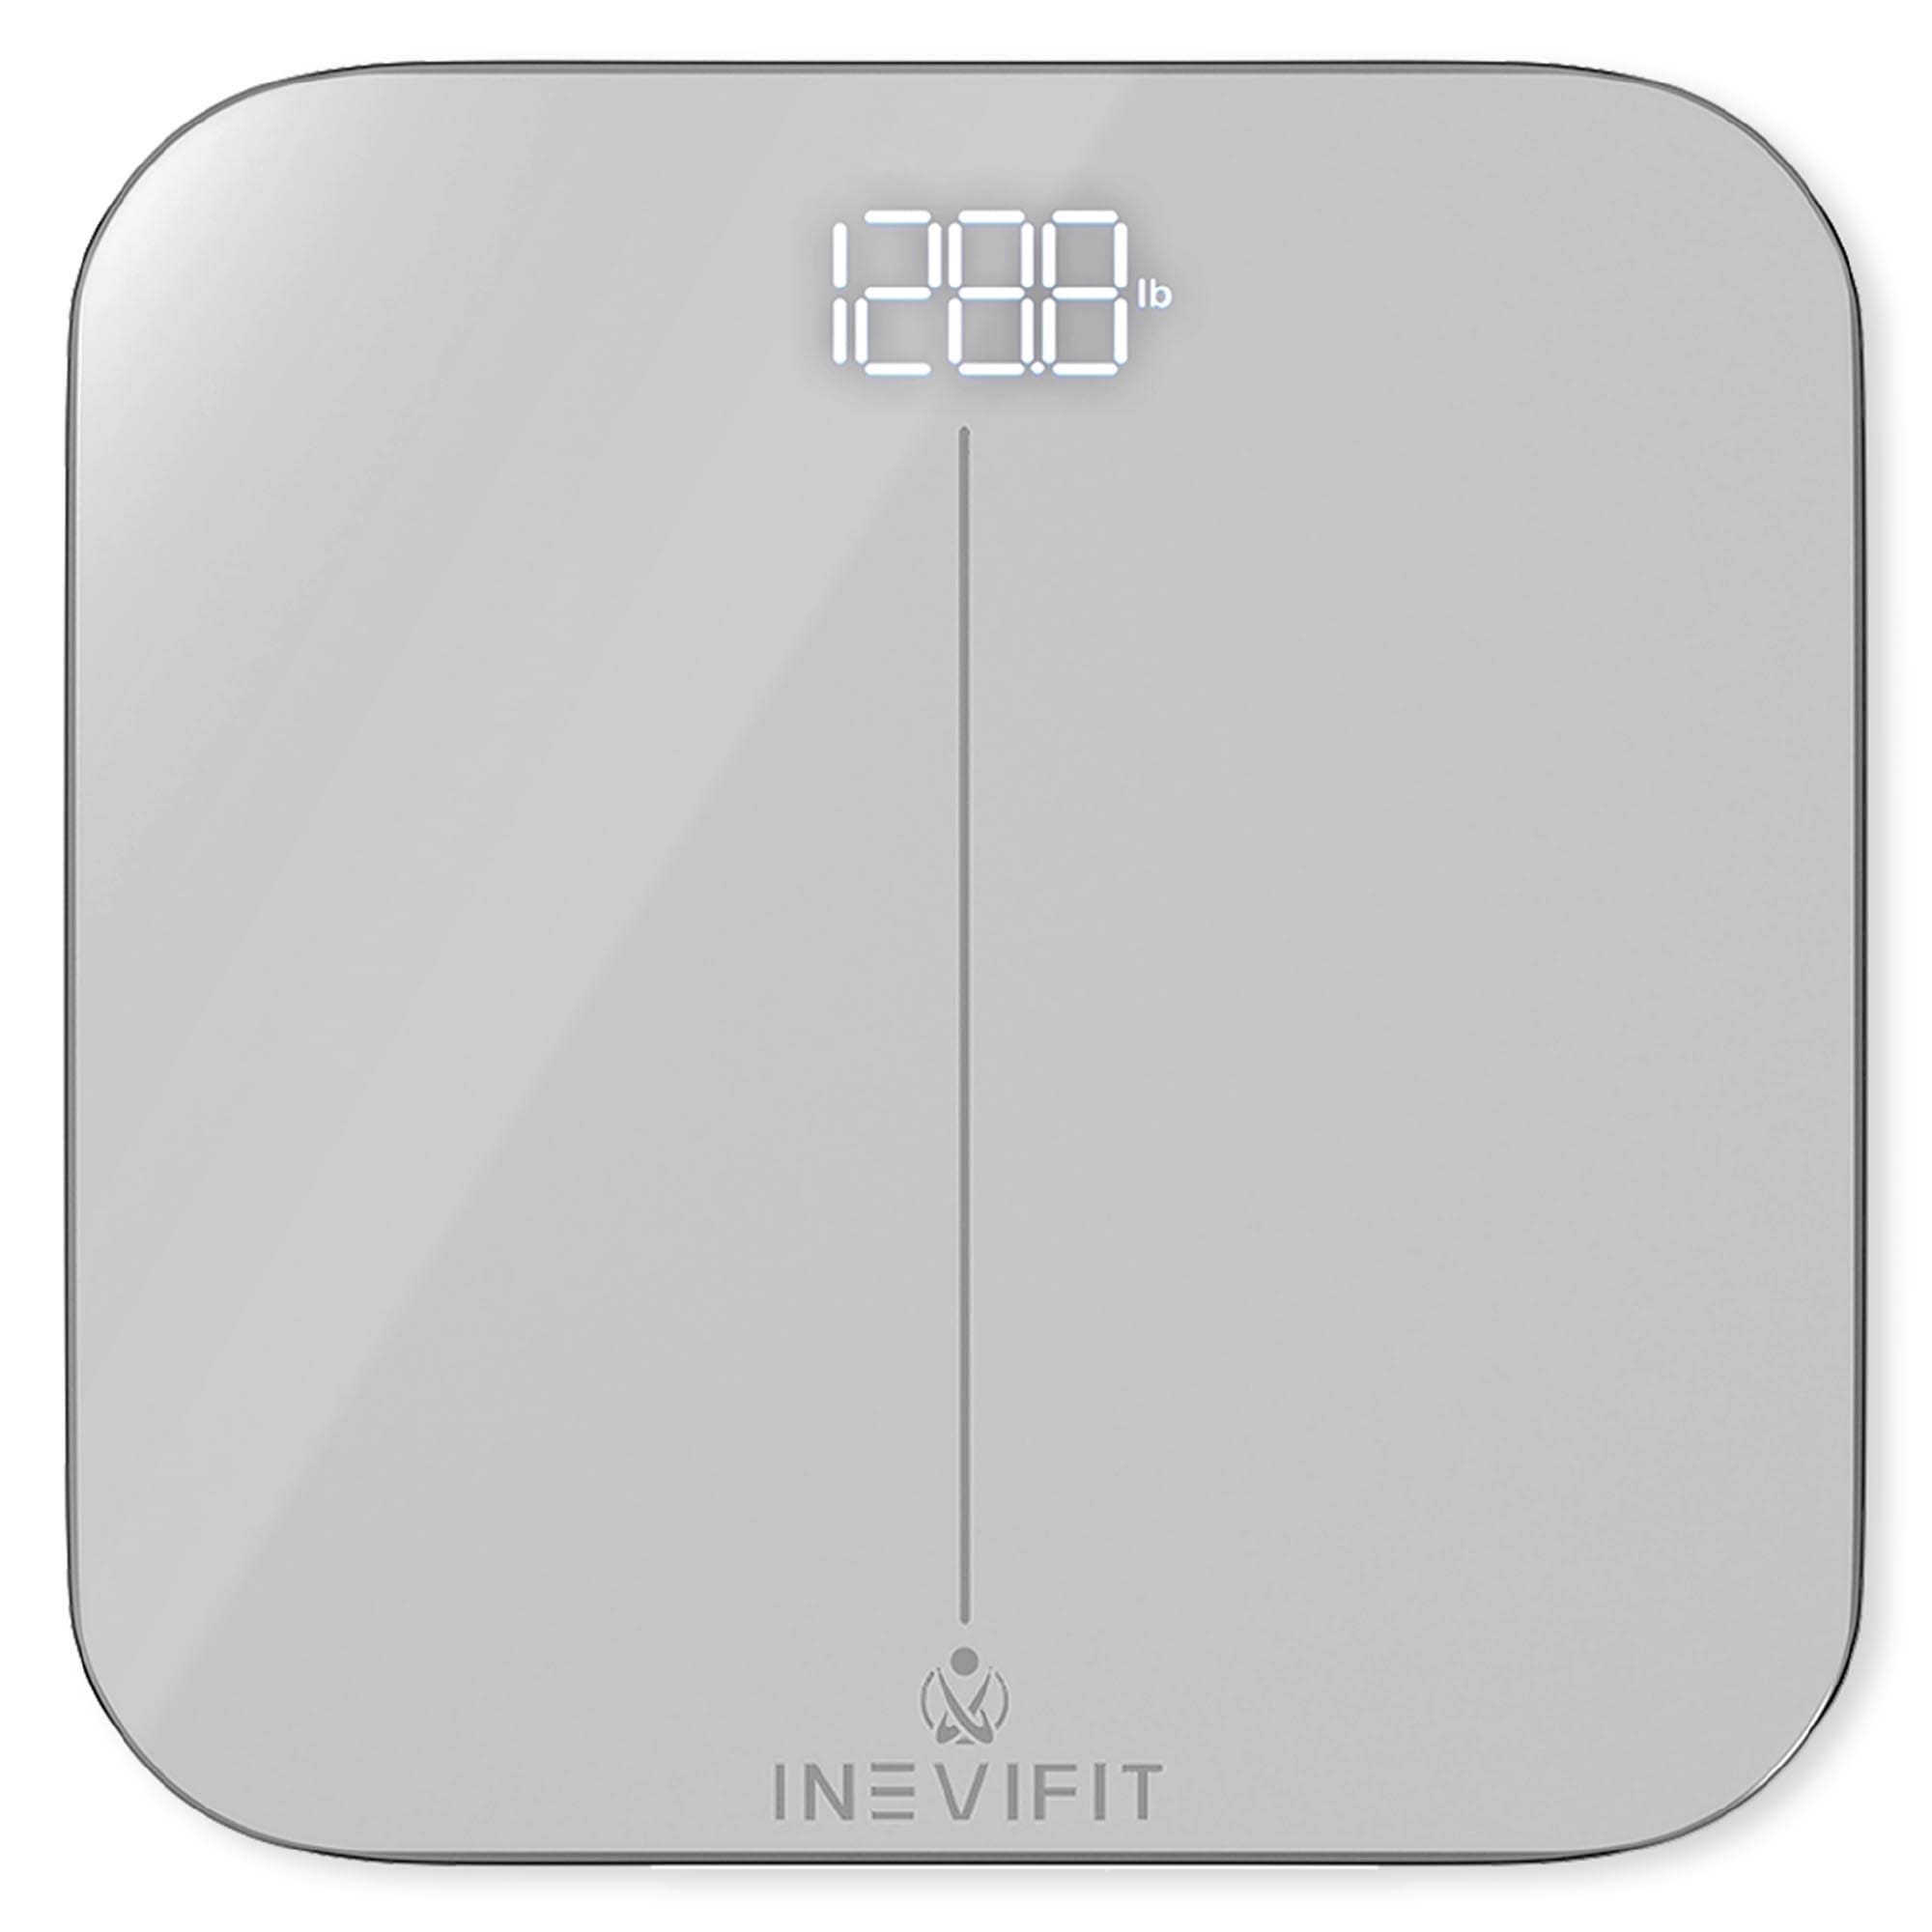 INEVIFIT BATHROOM SCALE, Highly Accurate Digital Bathroom Body Scale,  Measures Weight up to 400 lbs - Black 